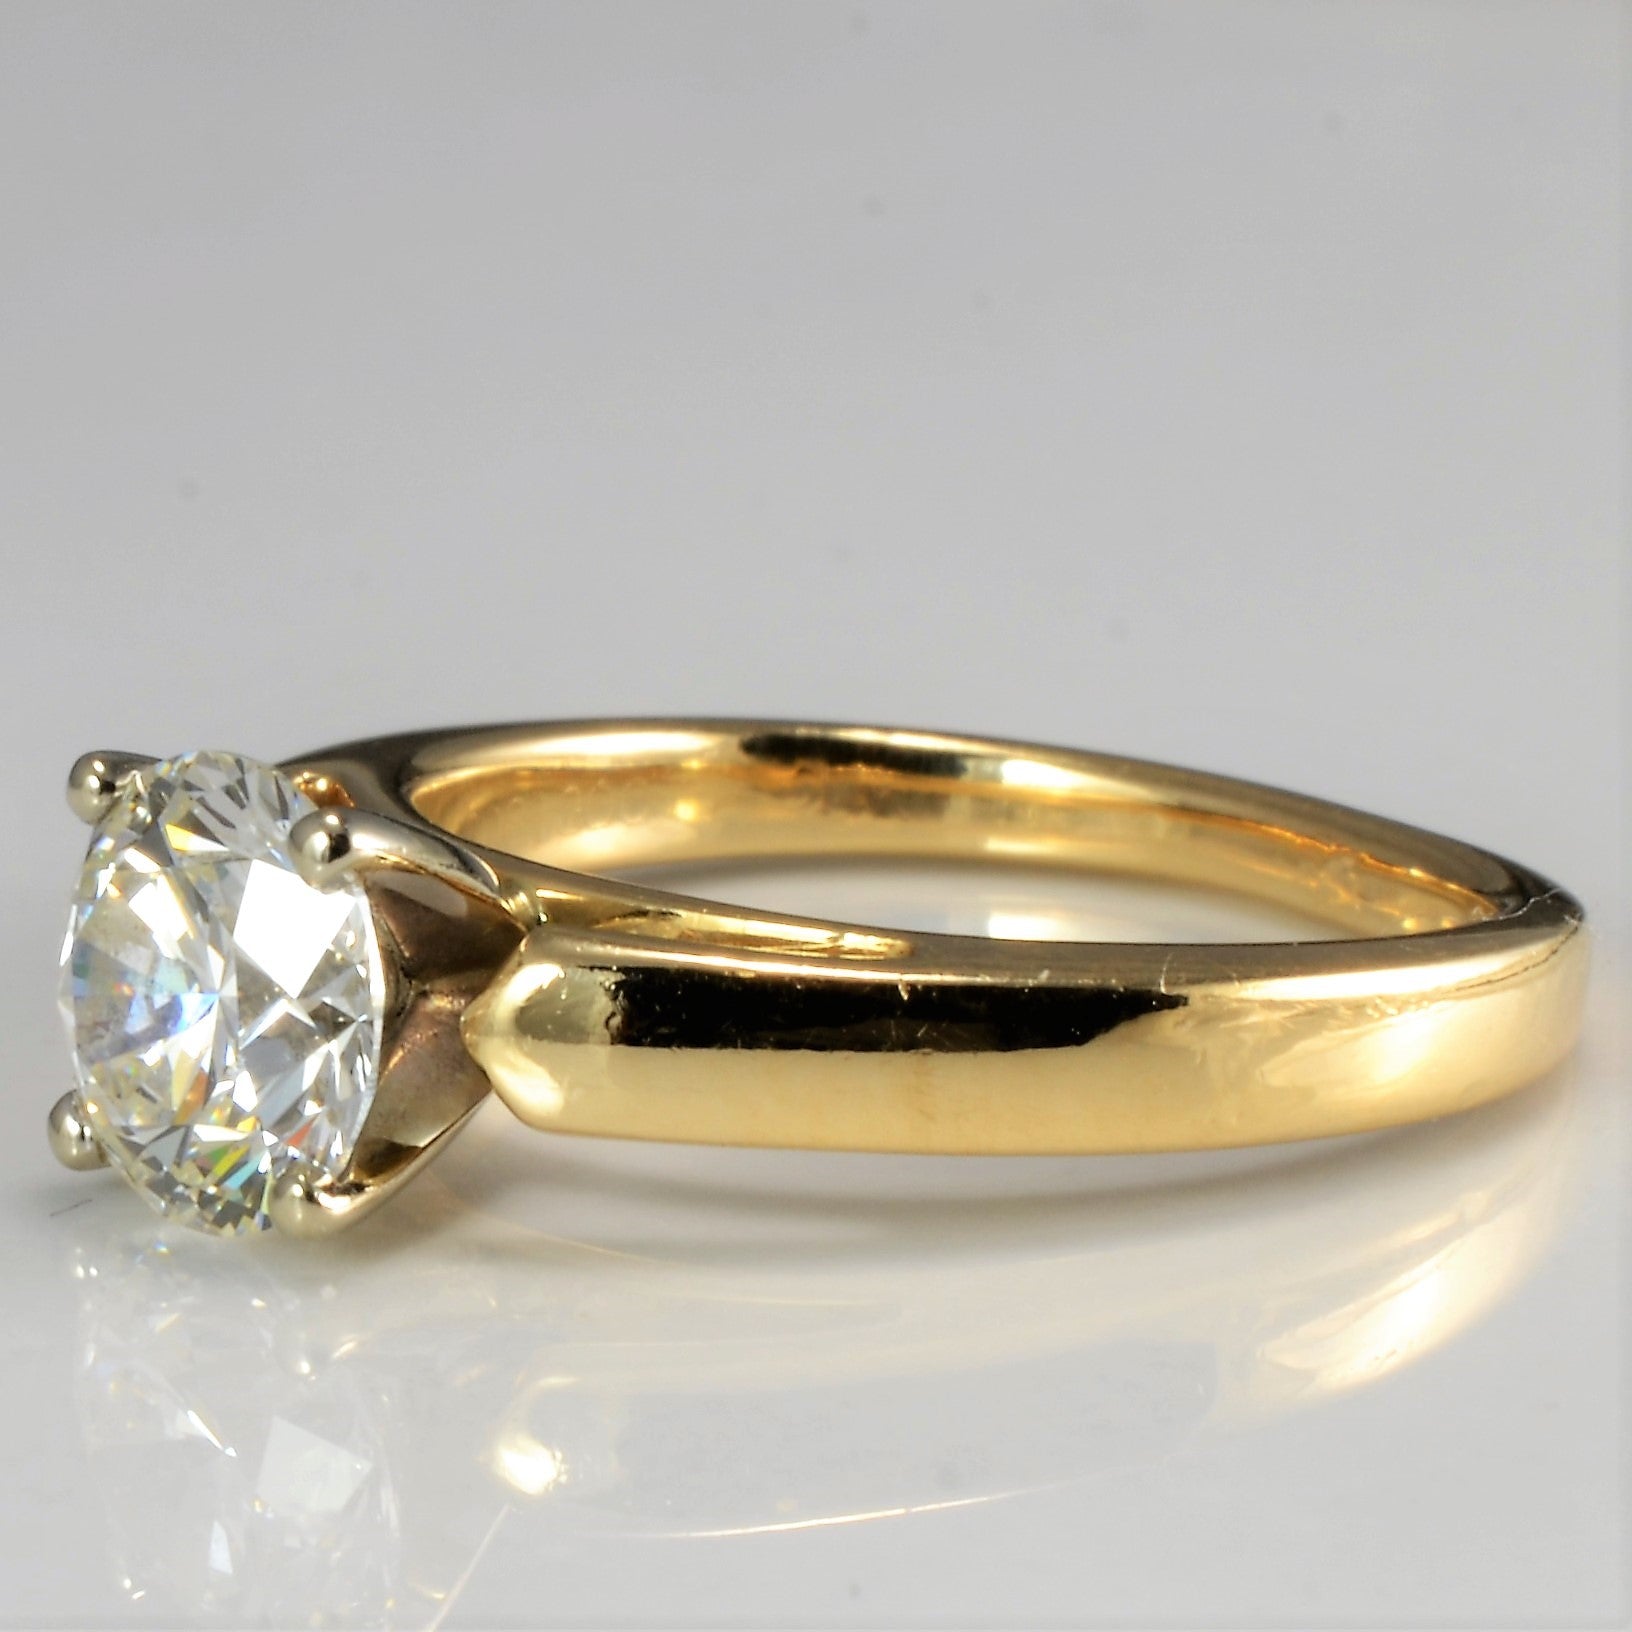 Tapered Solitaire Diamond Engagement Ring | 1.05 ct, SZ 4.5 | VVS2, I |